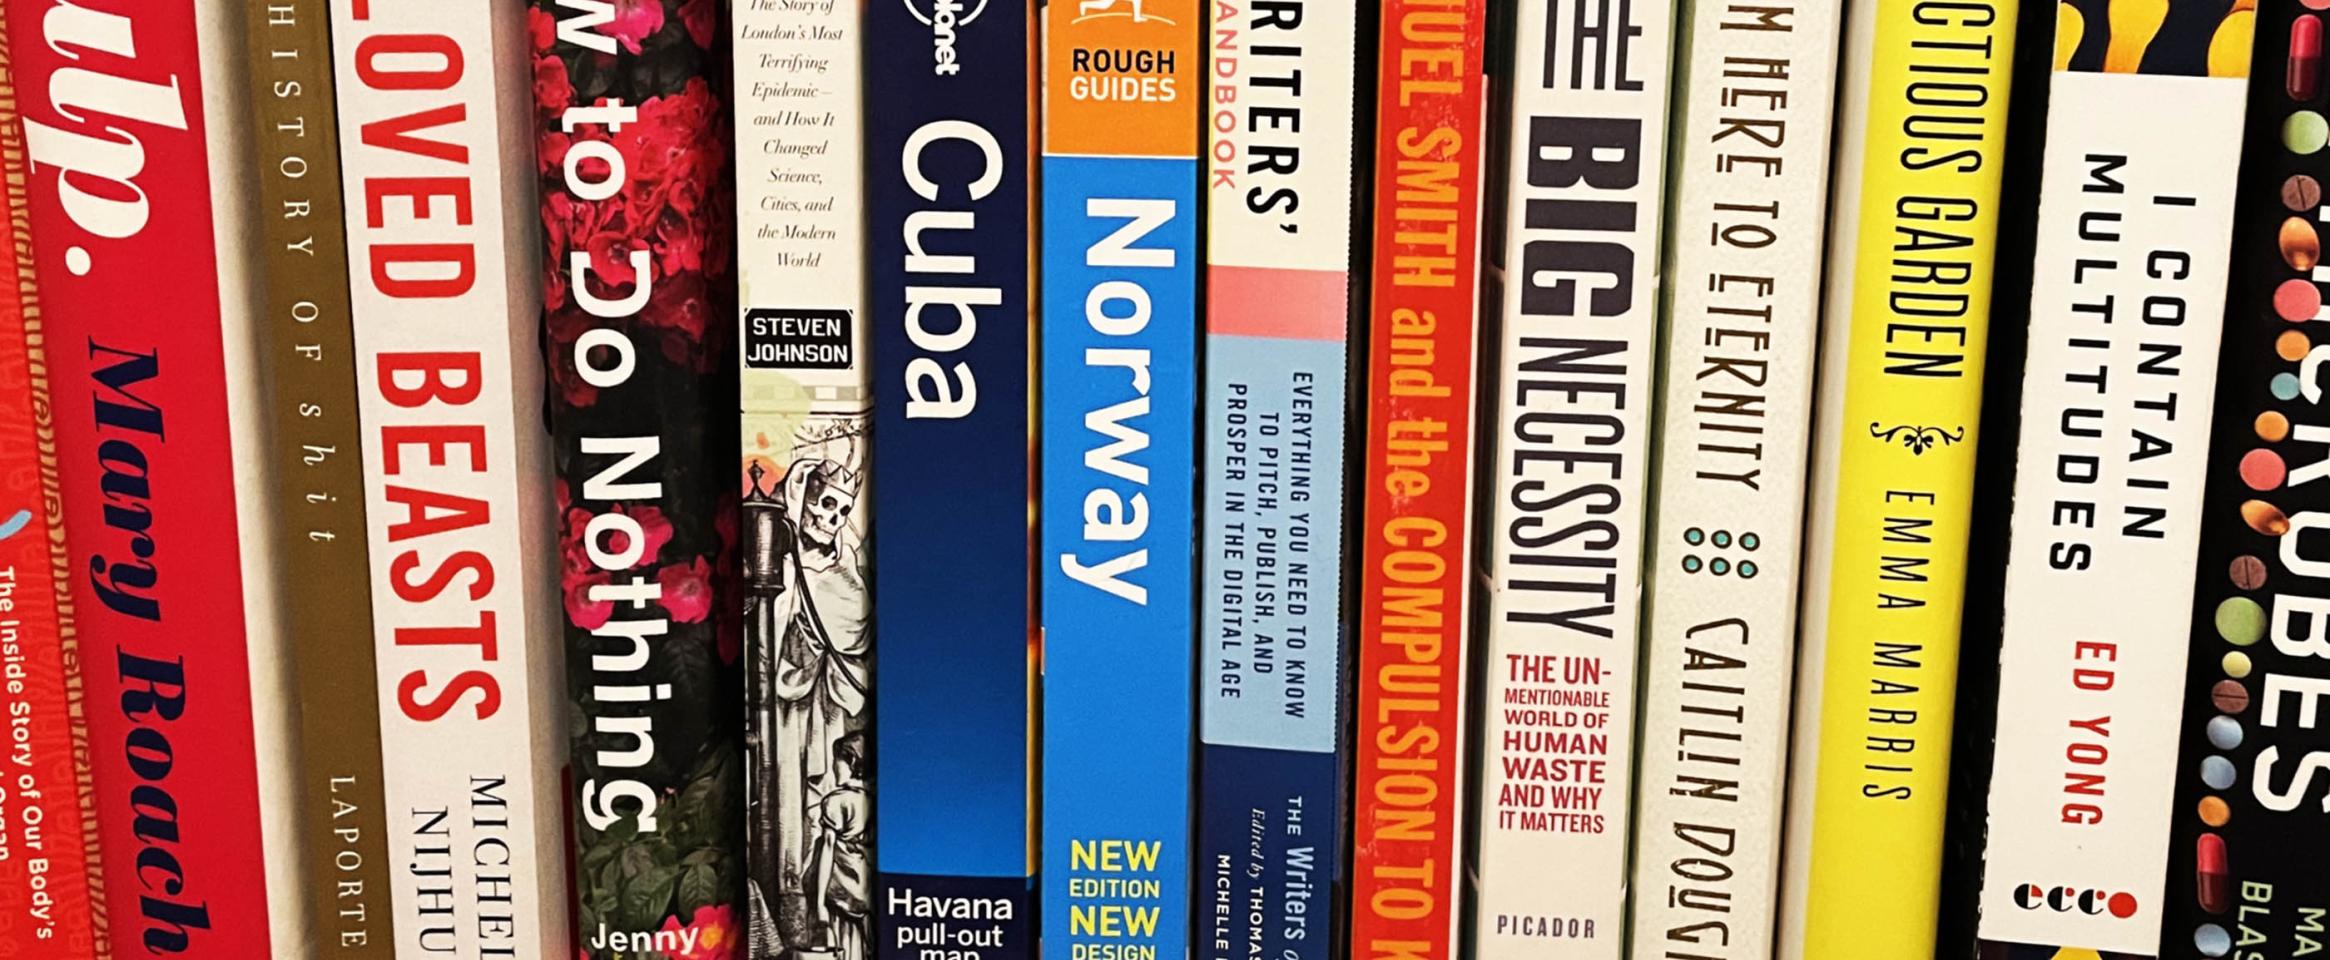 Photo of bookshelf in Bryn Nelson's office showing some of the reference books for his book, Flush.